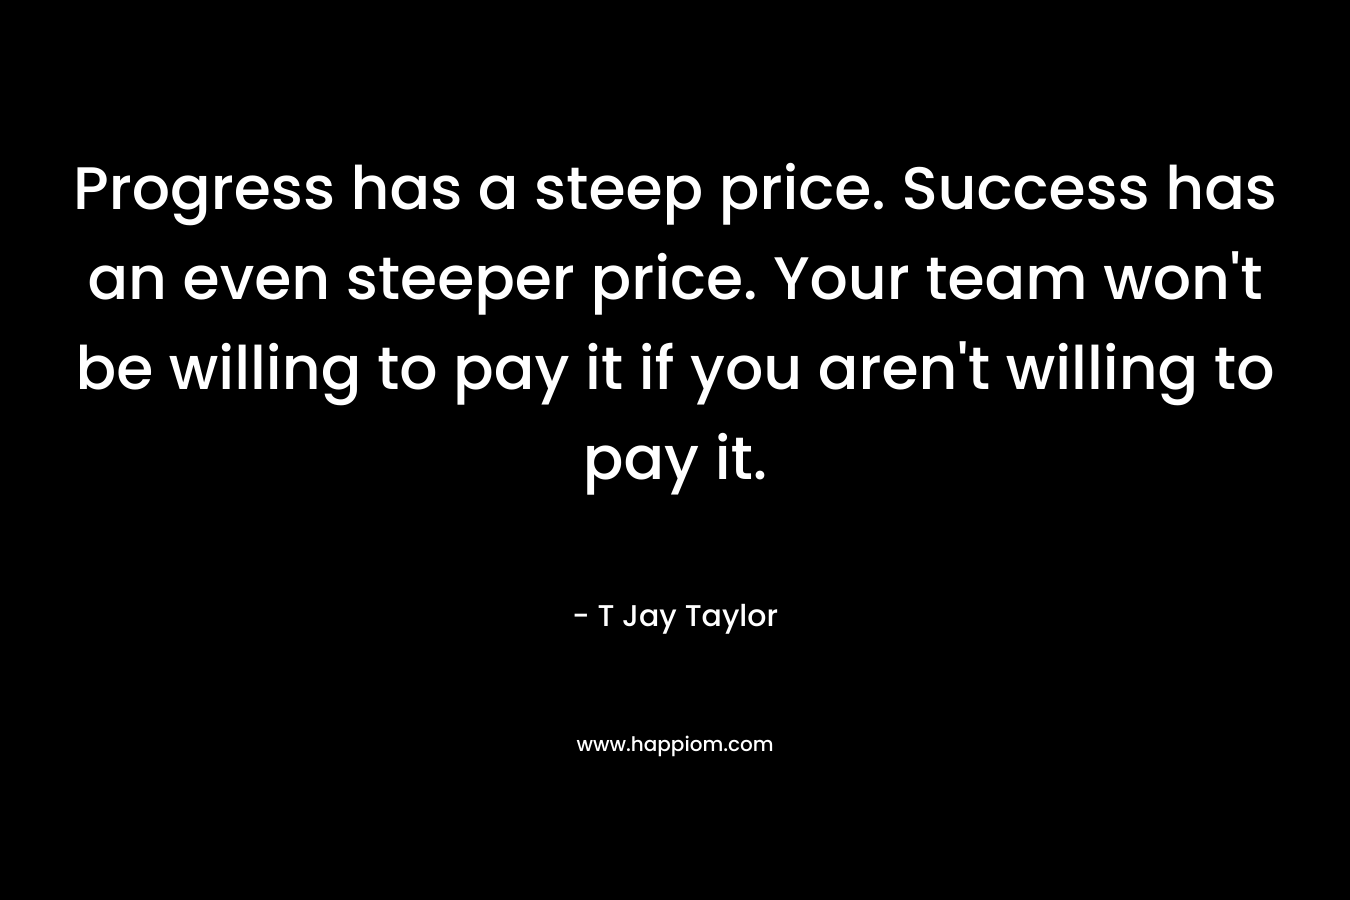 Progress has a steep price. Success has an even steeper price. Your team won’t be willing to pay it if you aren’t willing to pay it. – T Jay Taylor